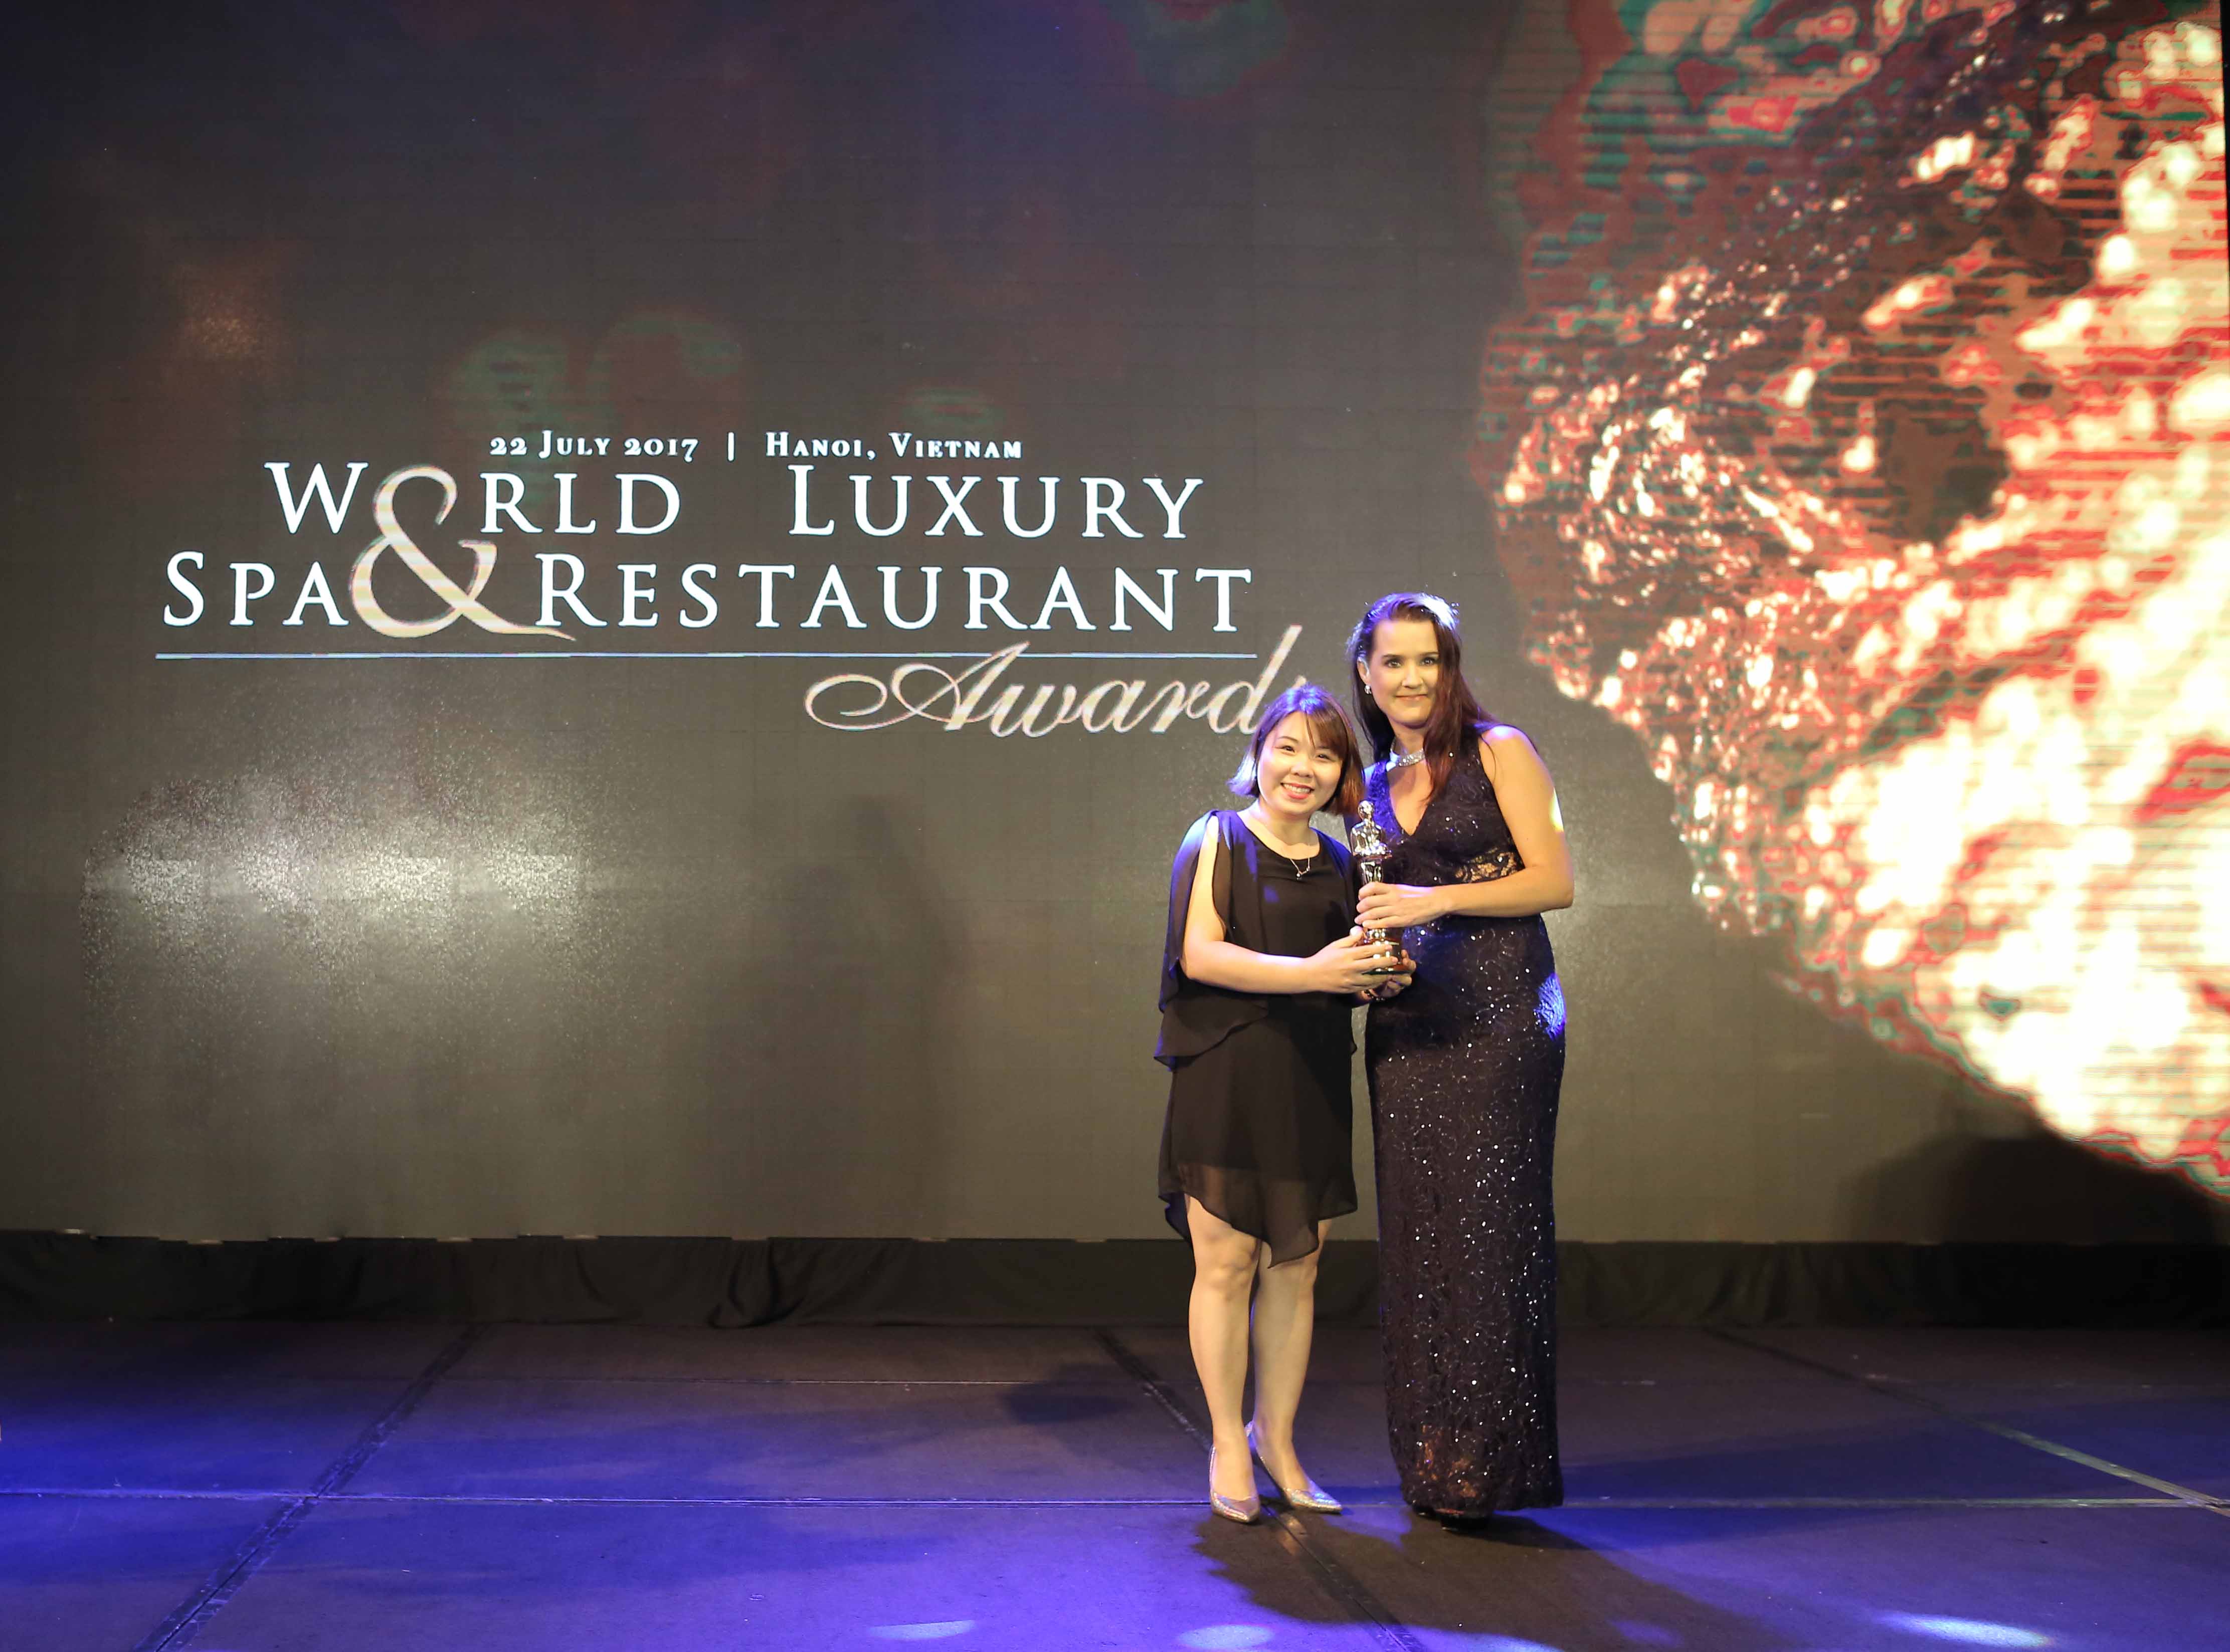 ms-dinh-thu-u-jw-caft-restaurant-manager-delighted-to-receive